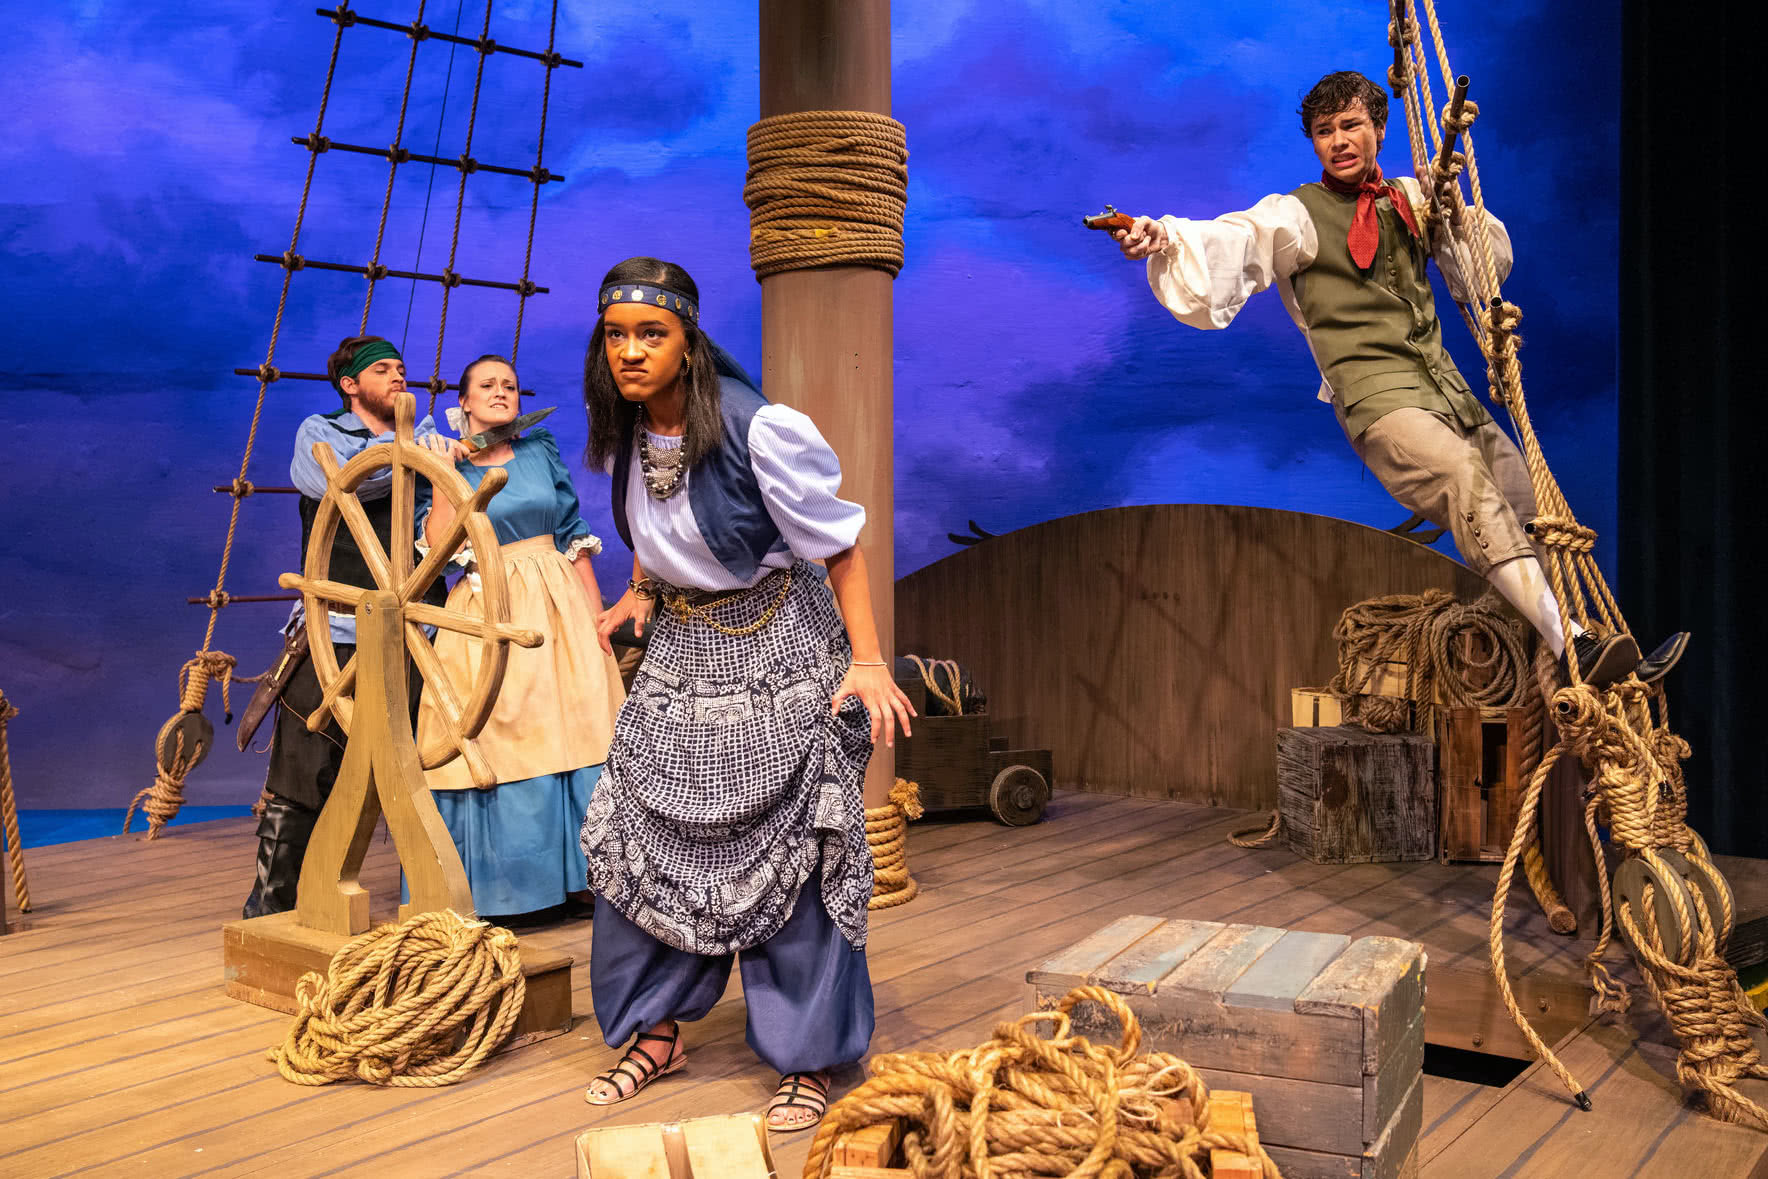 A female pirate looks angry on board a pirate ship, behind her a boy aims a pistol at her; in the background another pirate threatens a lady with a knife in PCC's Treasure Island.